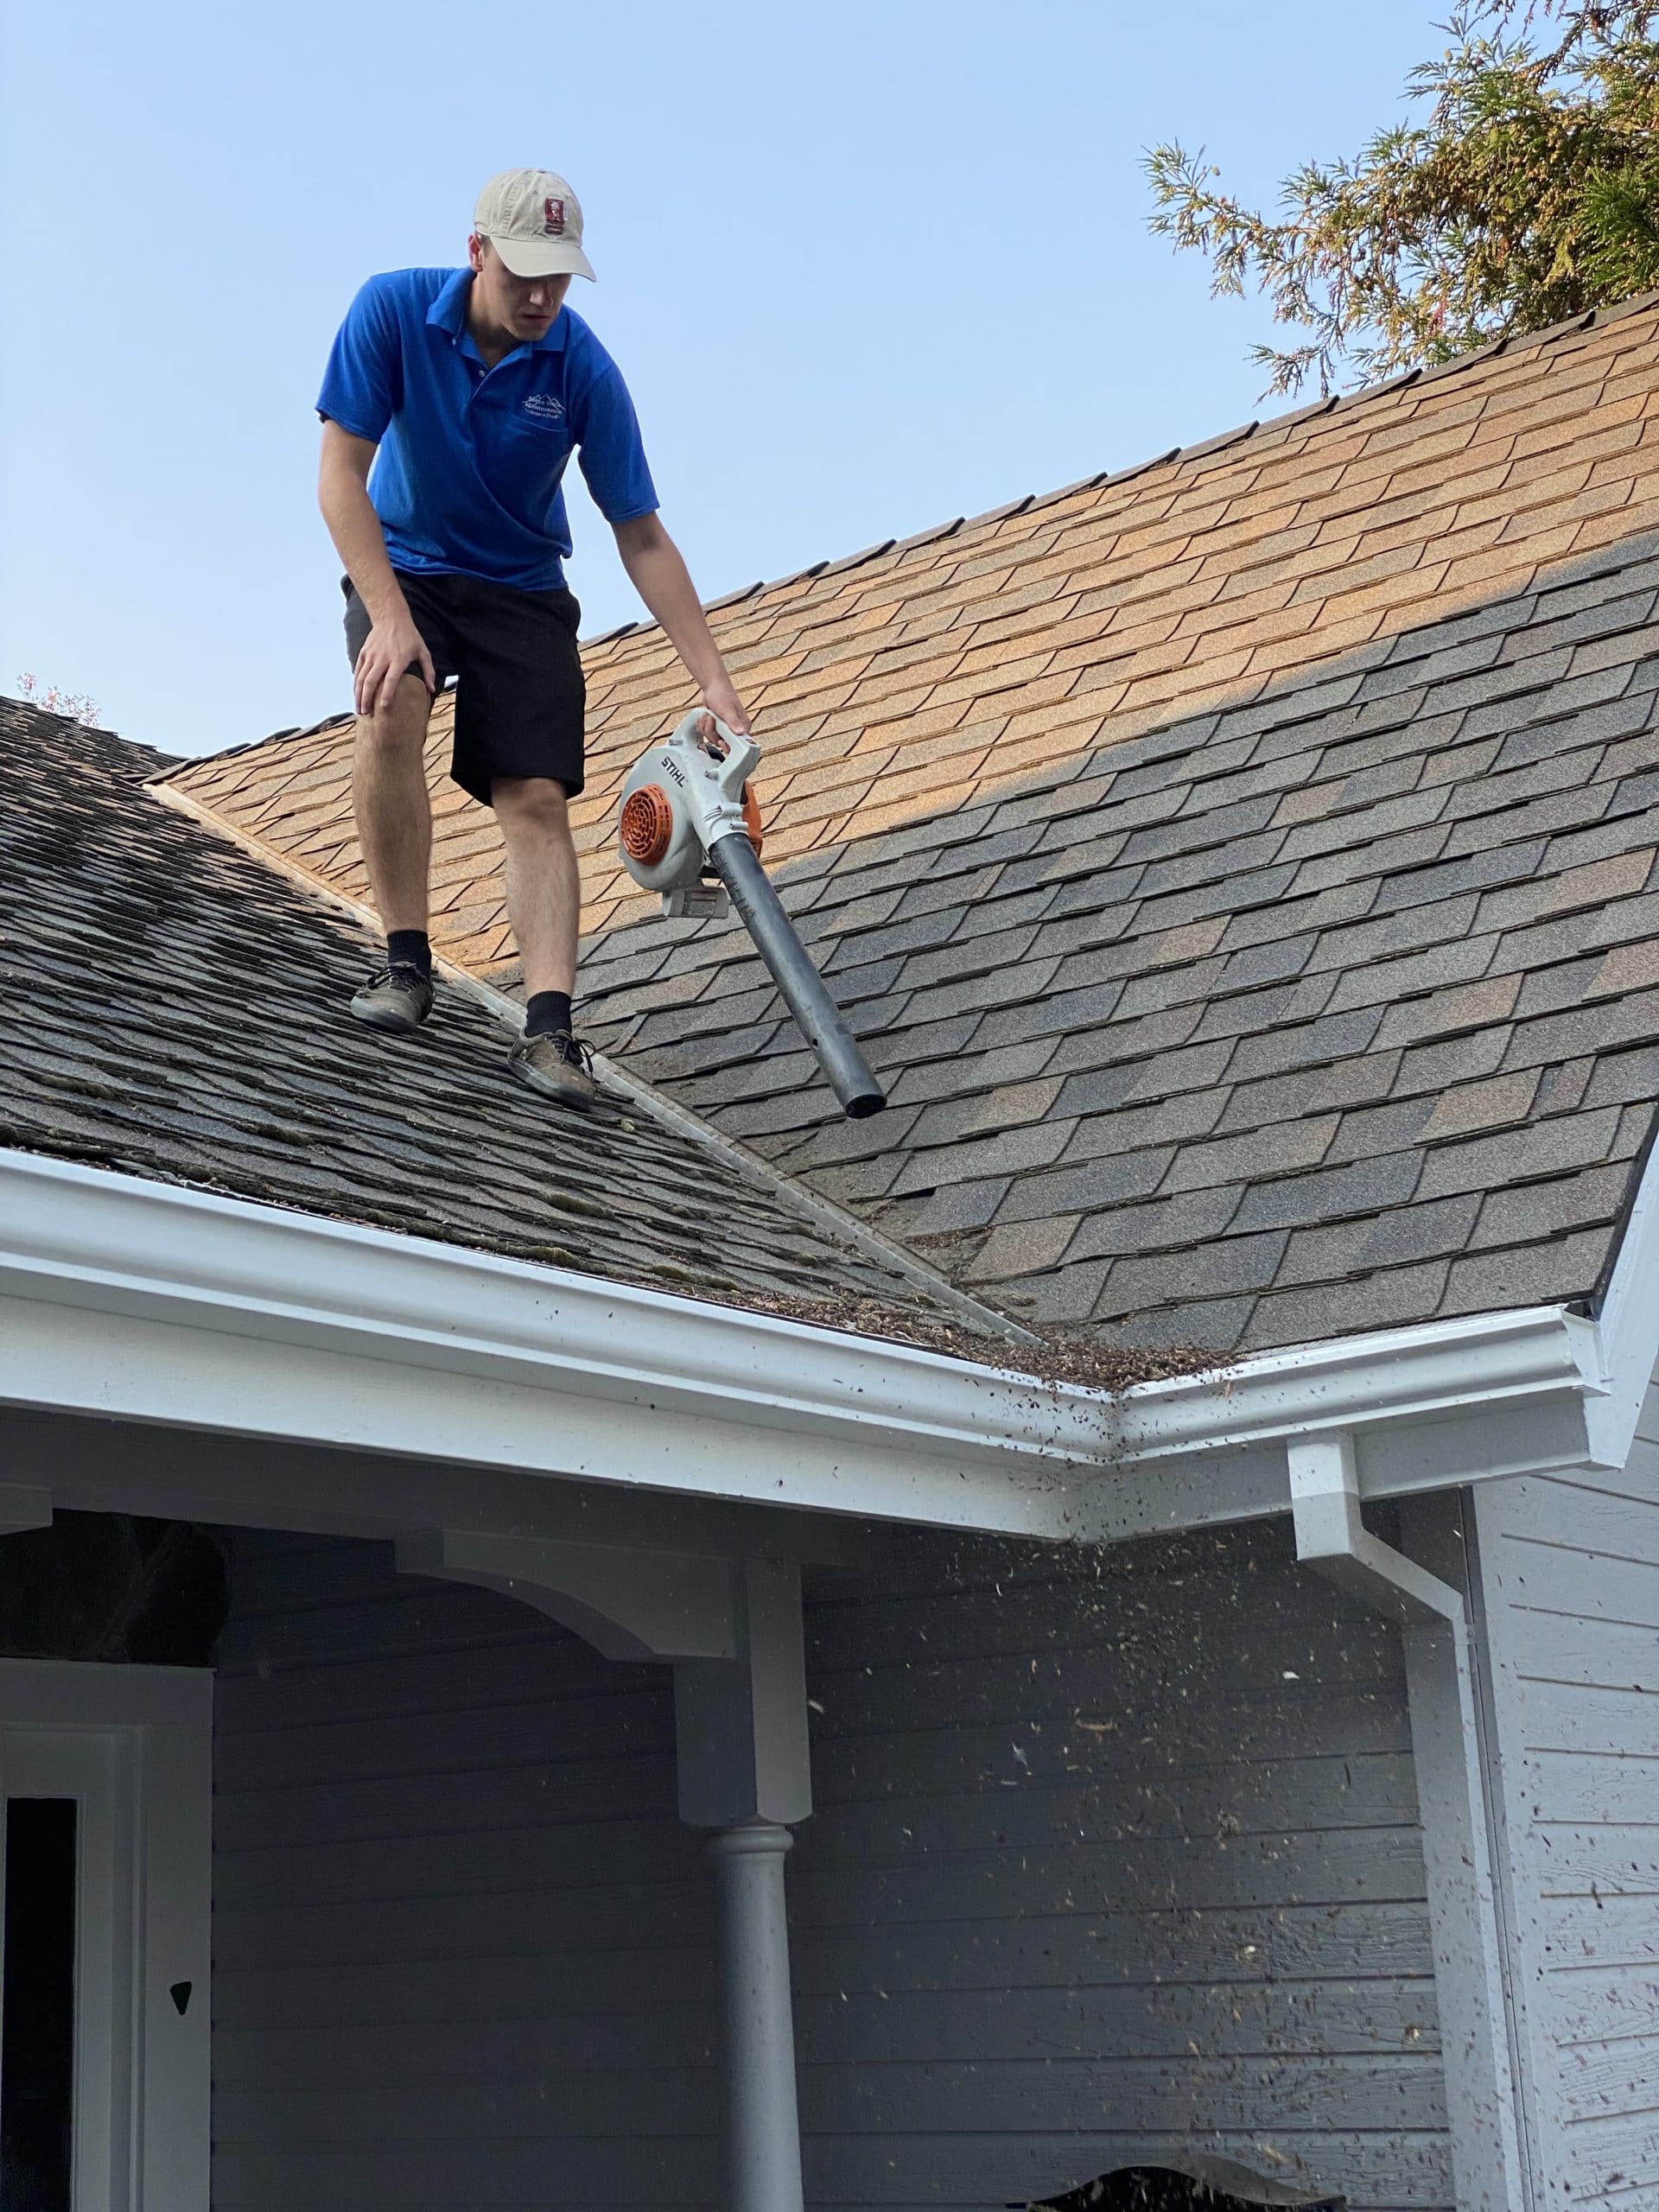 6 Skills You Need To Work In The Home Exterior Cleaning Industry